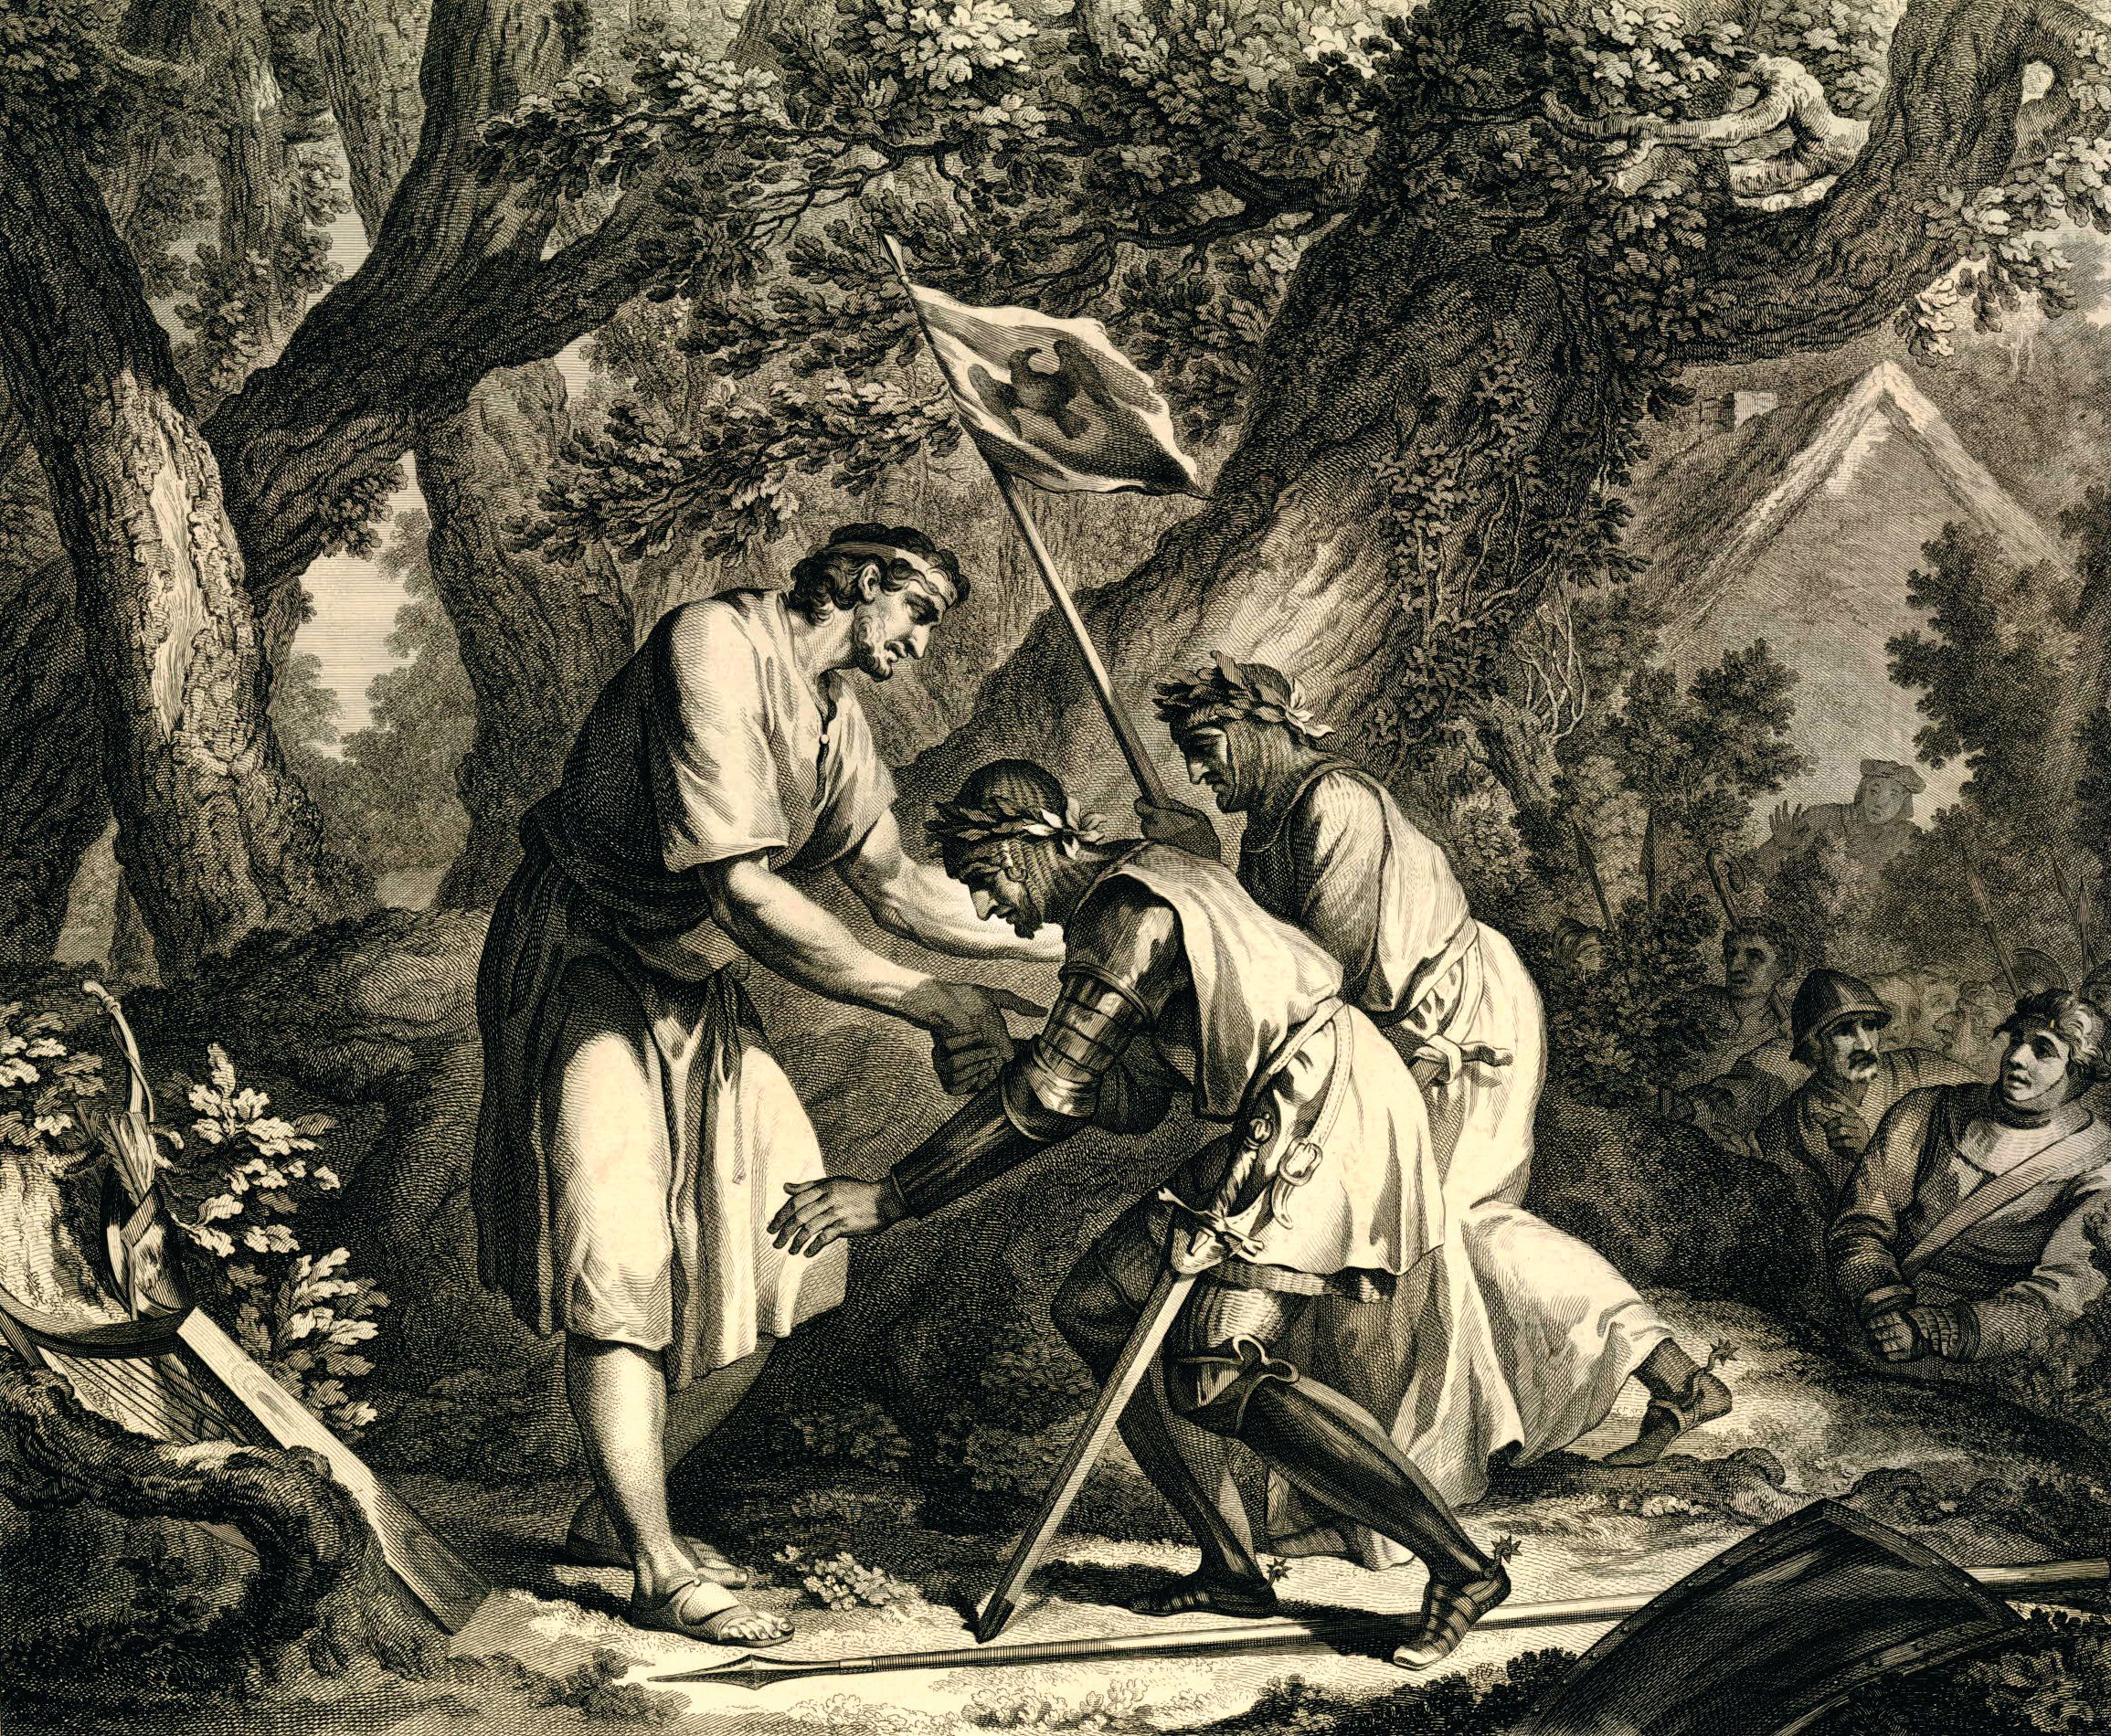 A 1778 engraving of Alfred, left, on the isle of Athelney, greeting messengers who bring word of a victory over the Danes. Alfred and a small number of men retreated to Athelney where he was able to conduct raids against the Danes.